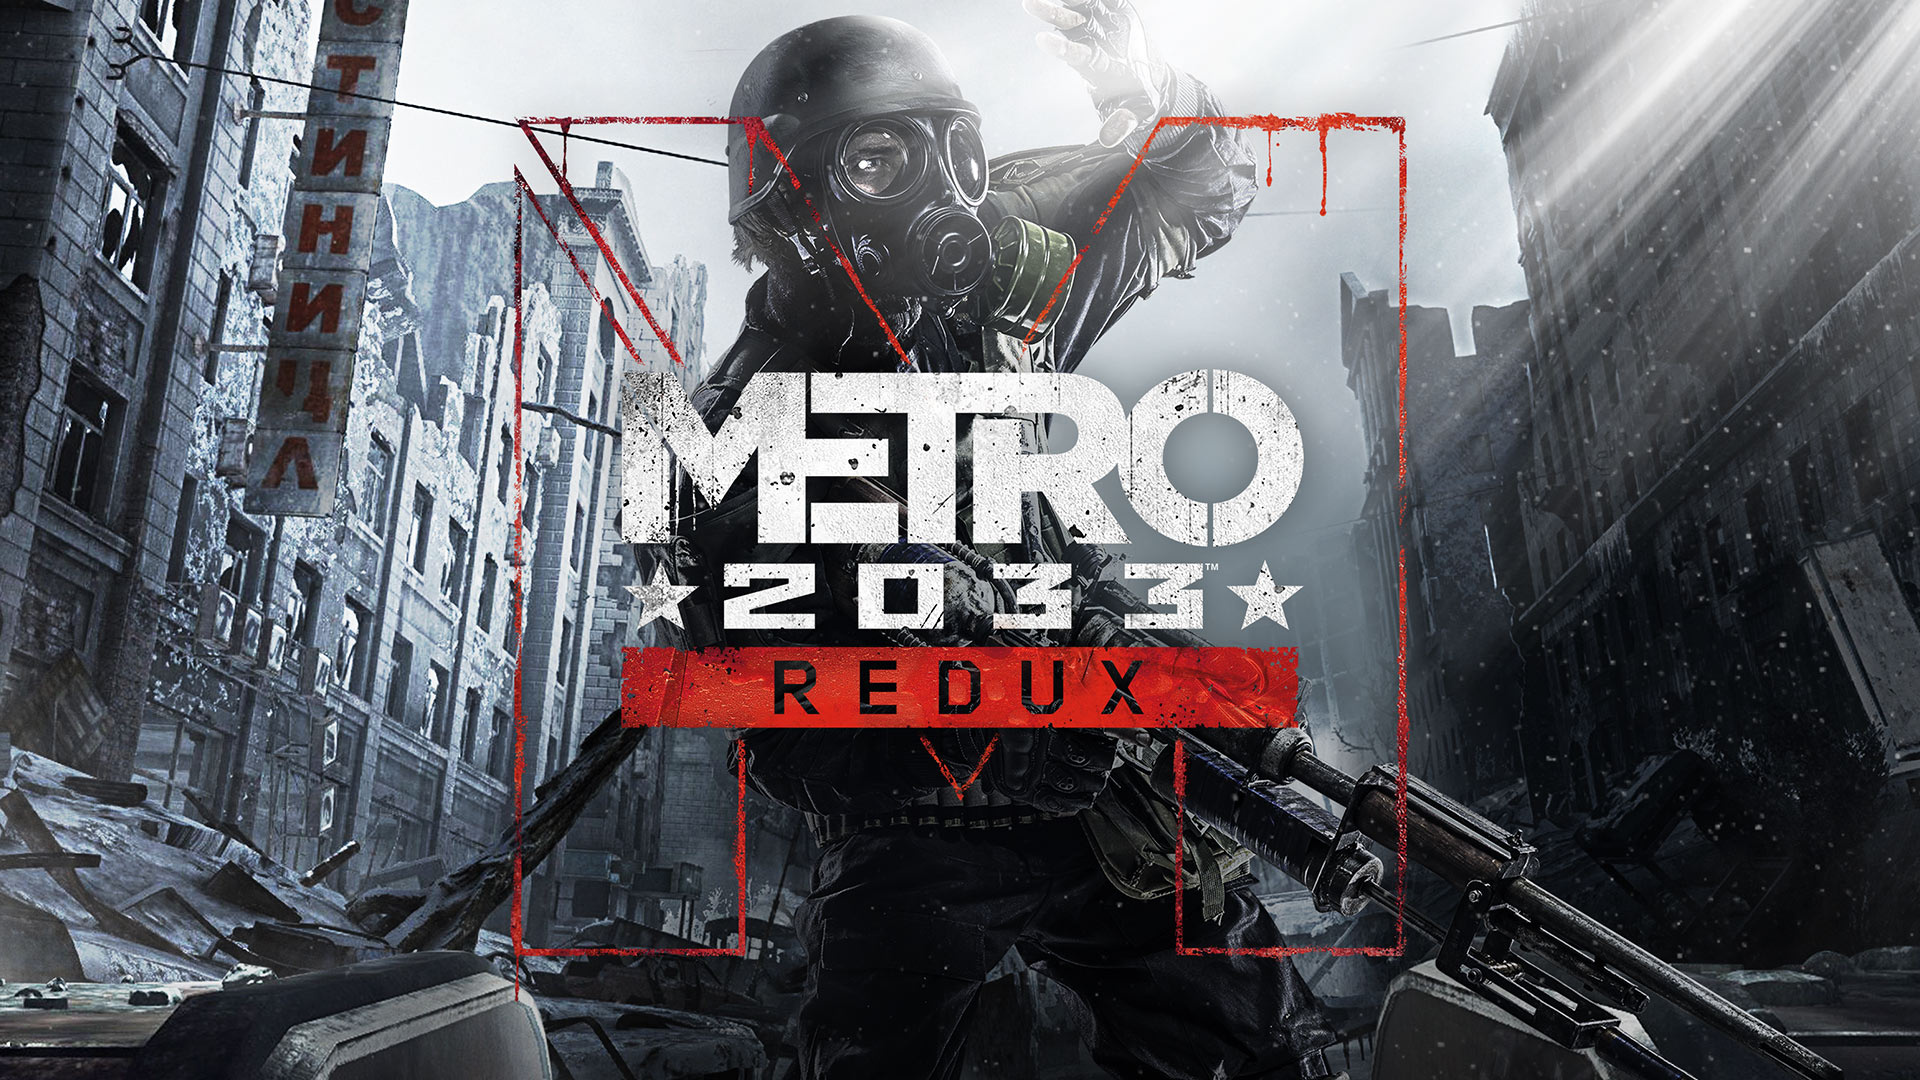 Metro: 2033 Redux, Ruined cityscape, Action-packed adventure, Atmospheric setting, 1920x1080 Full HD Desktop